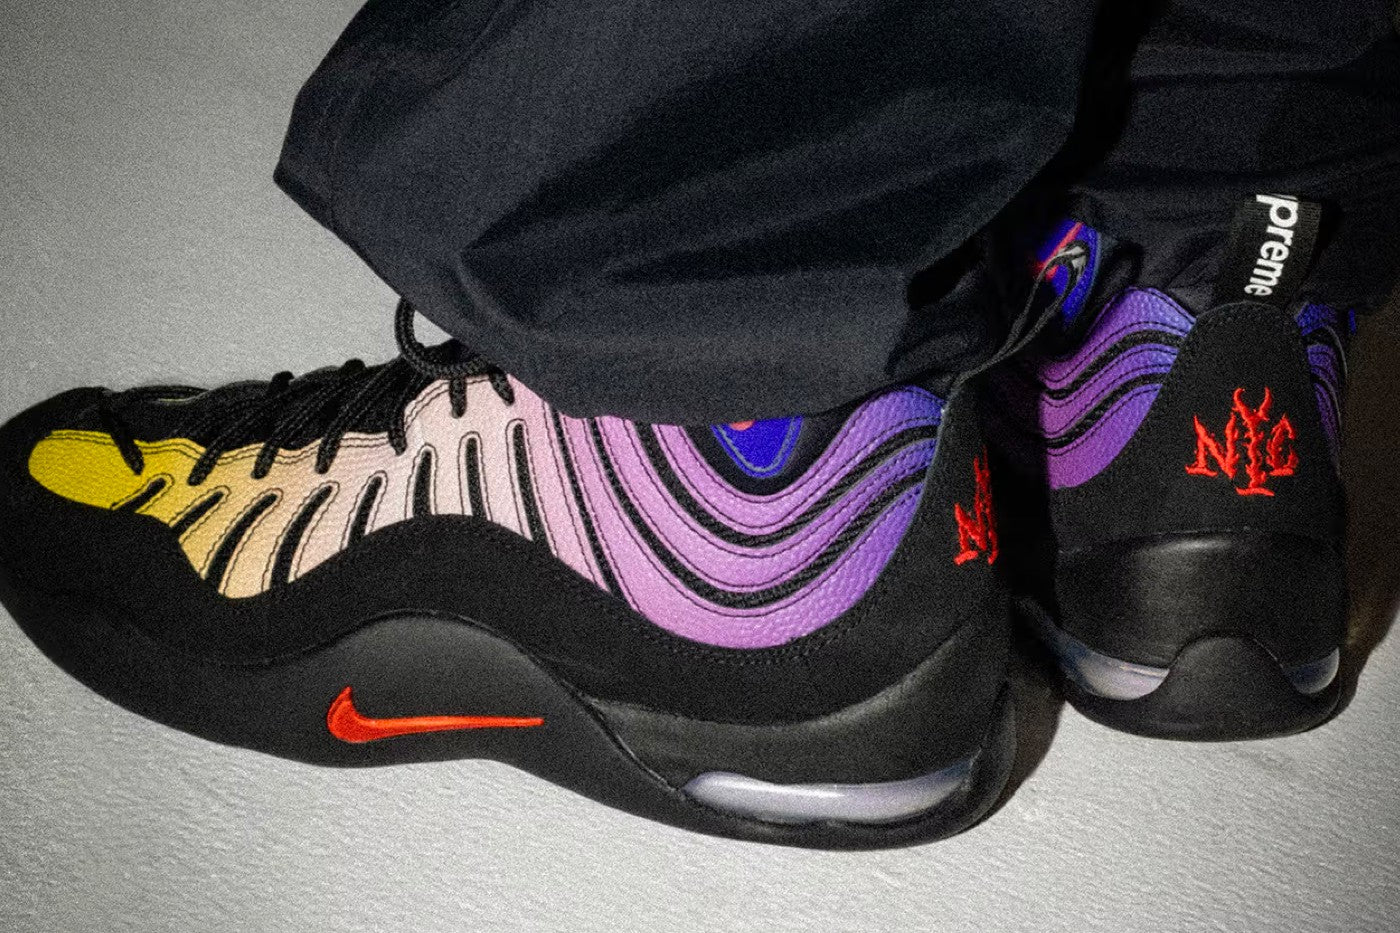 The Supreme x Nike Air Bakin Collaboration is Finally Here